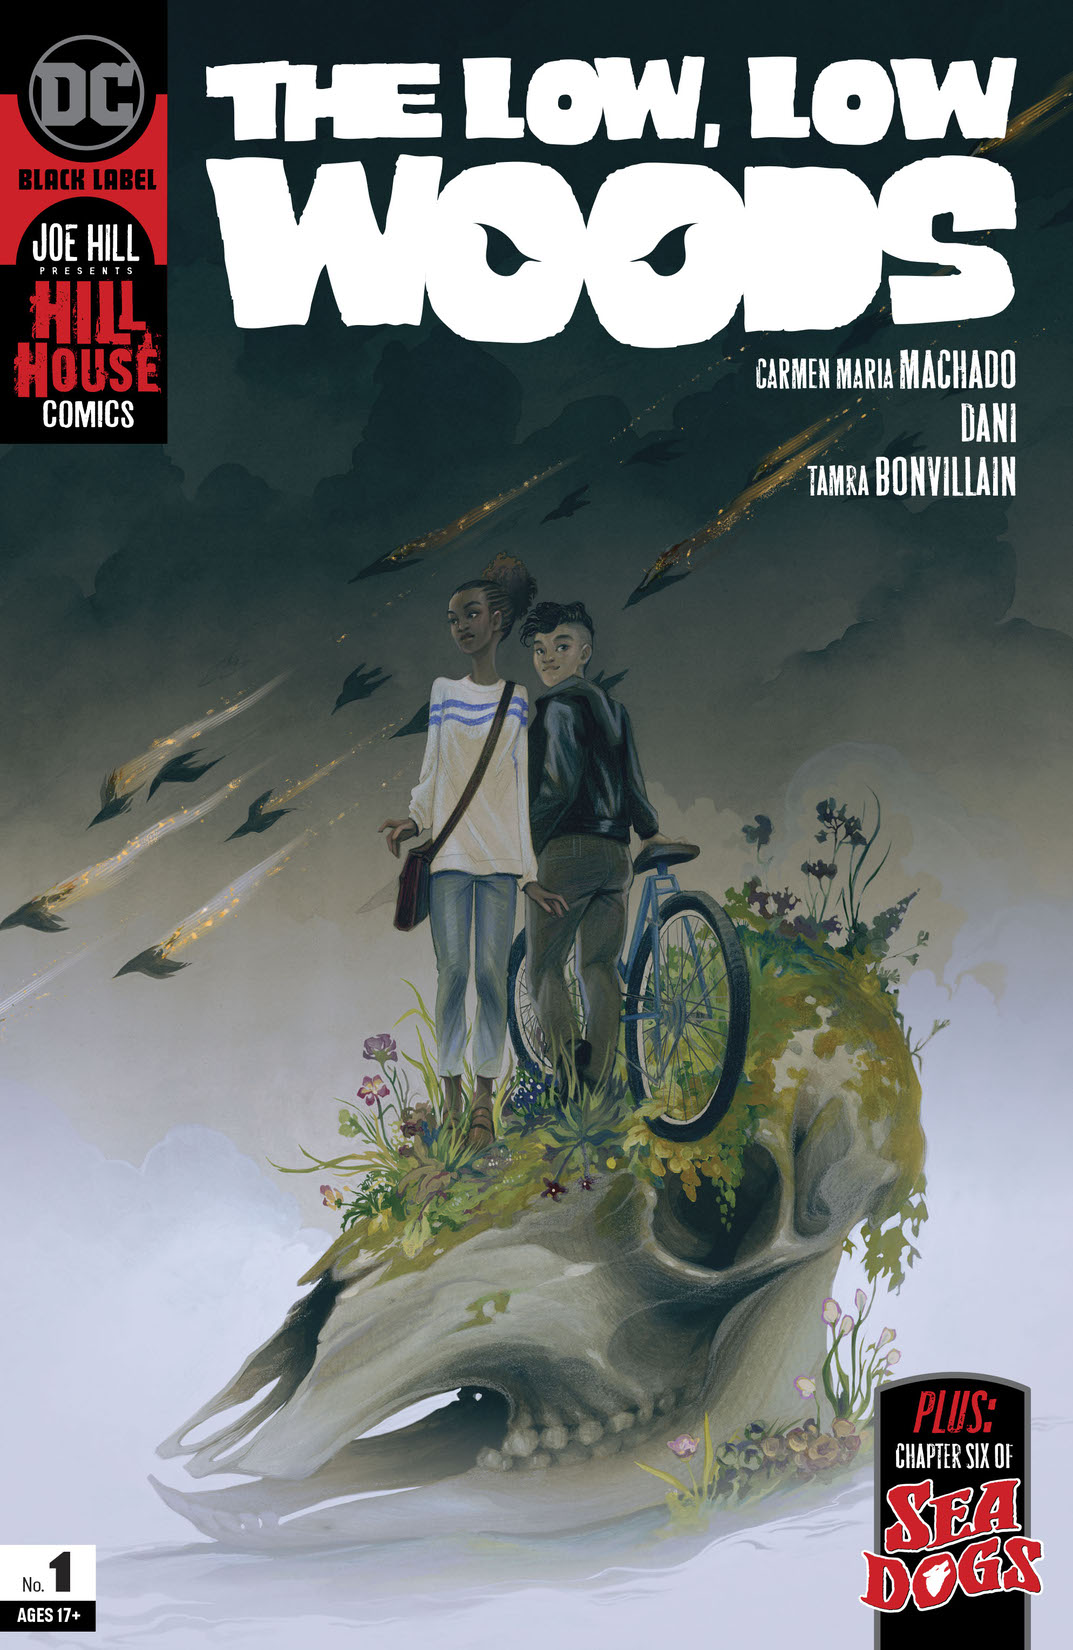 The Low, Low Woods #1 preview images